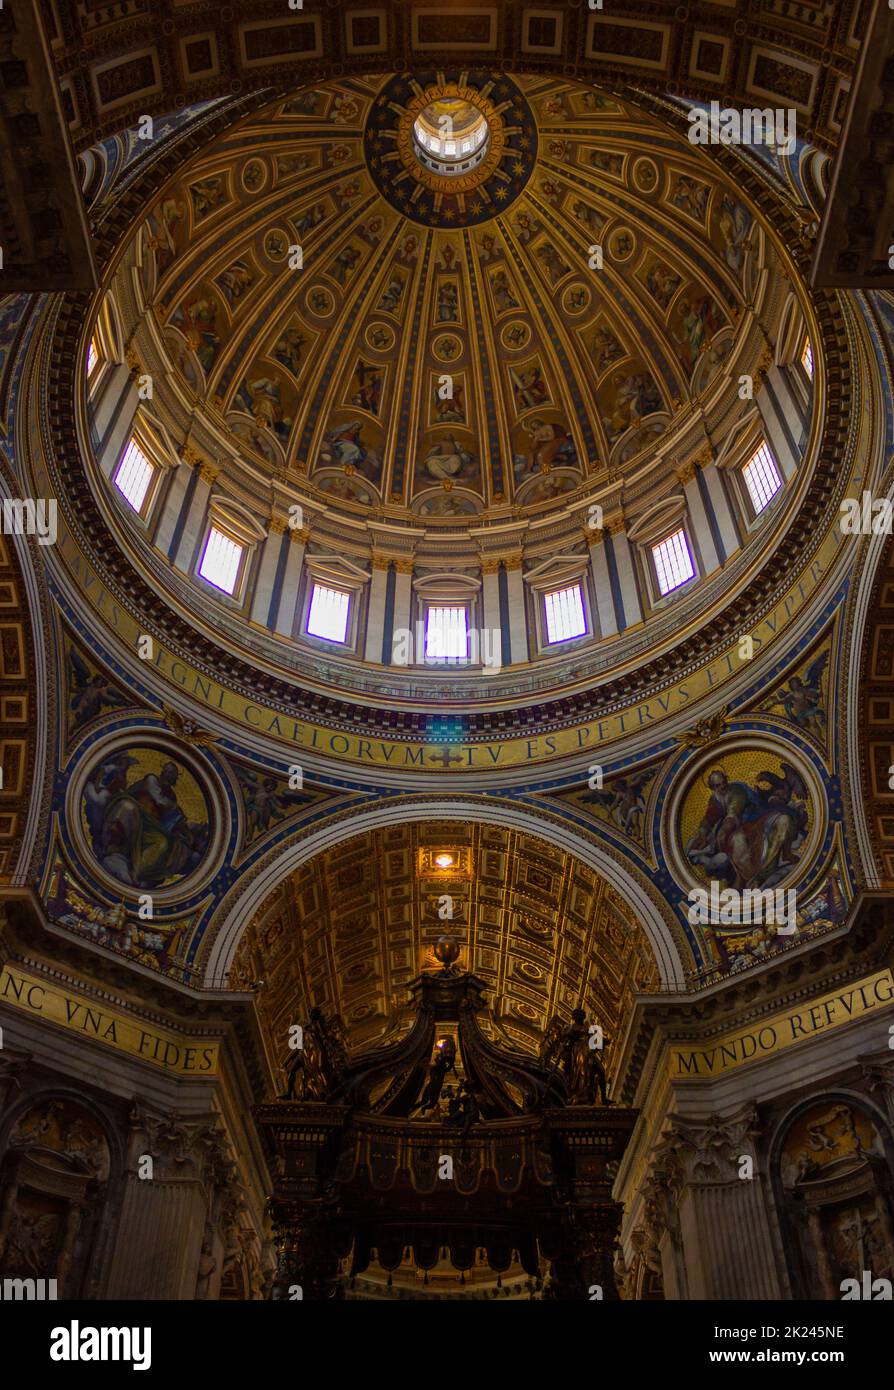 A picture of the interior of the St. Peter's Basilica and its iconic dome. Stock Photo